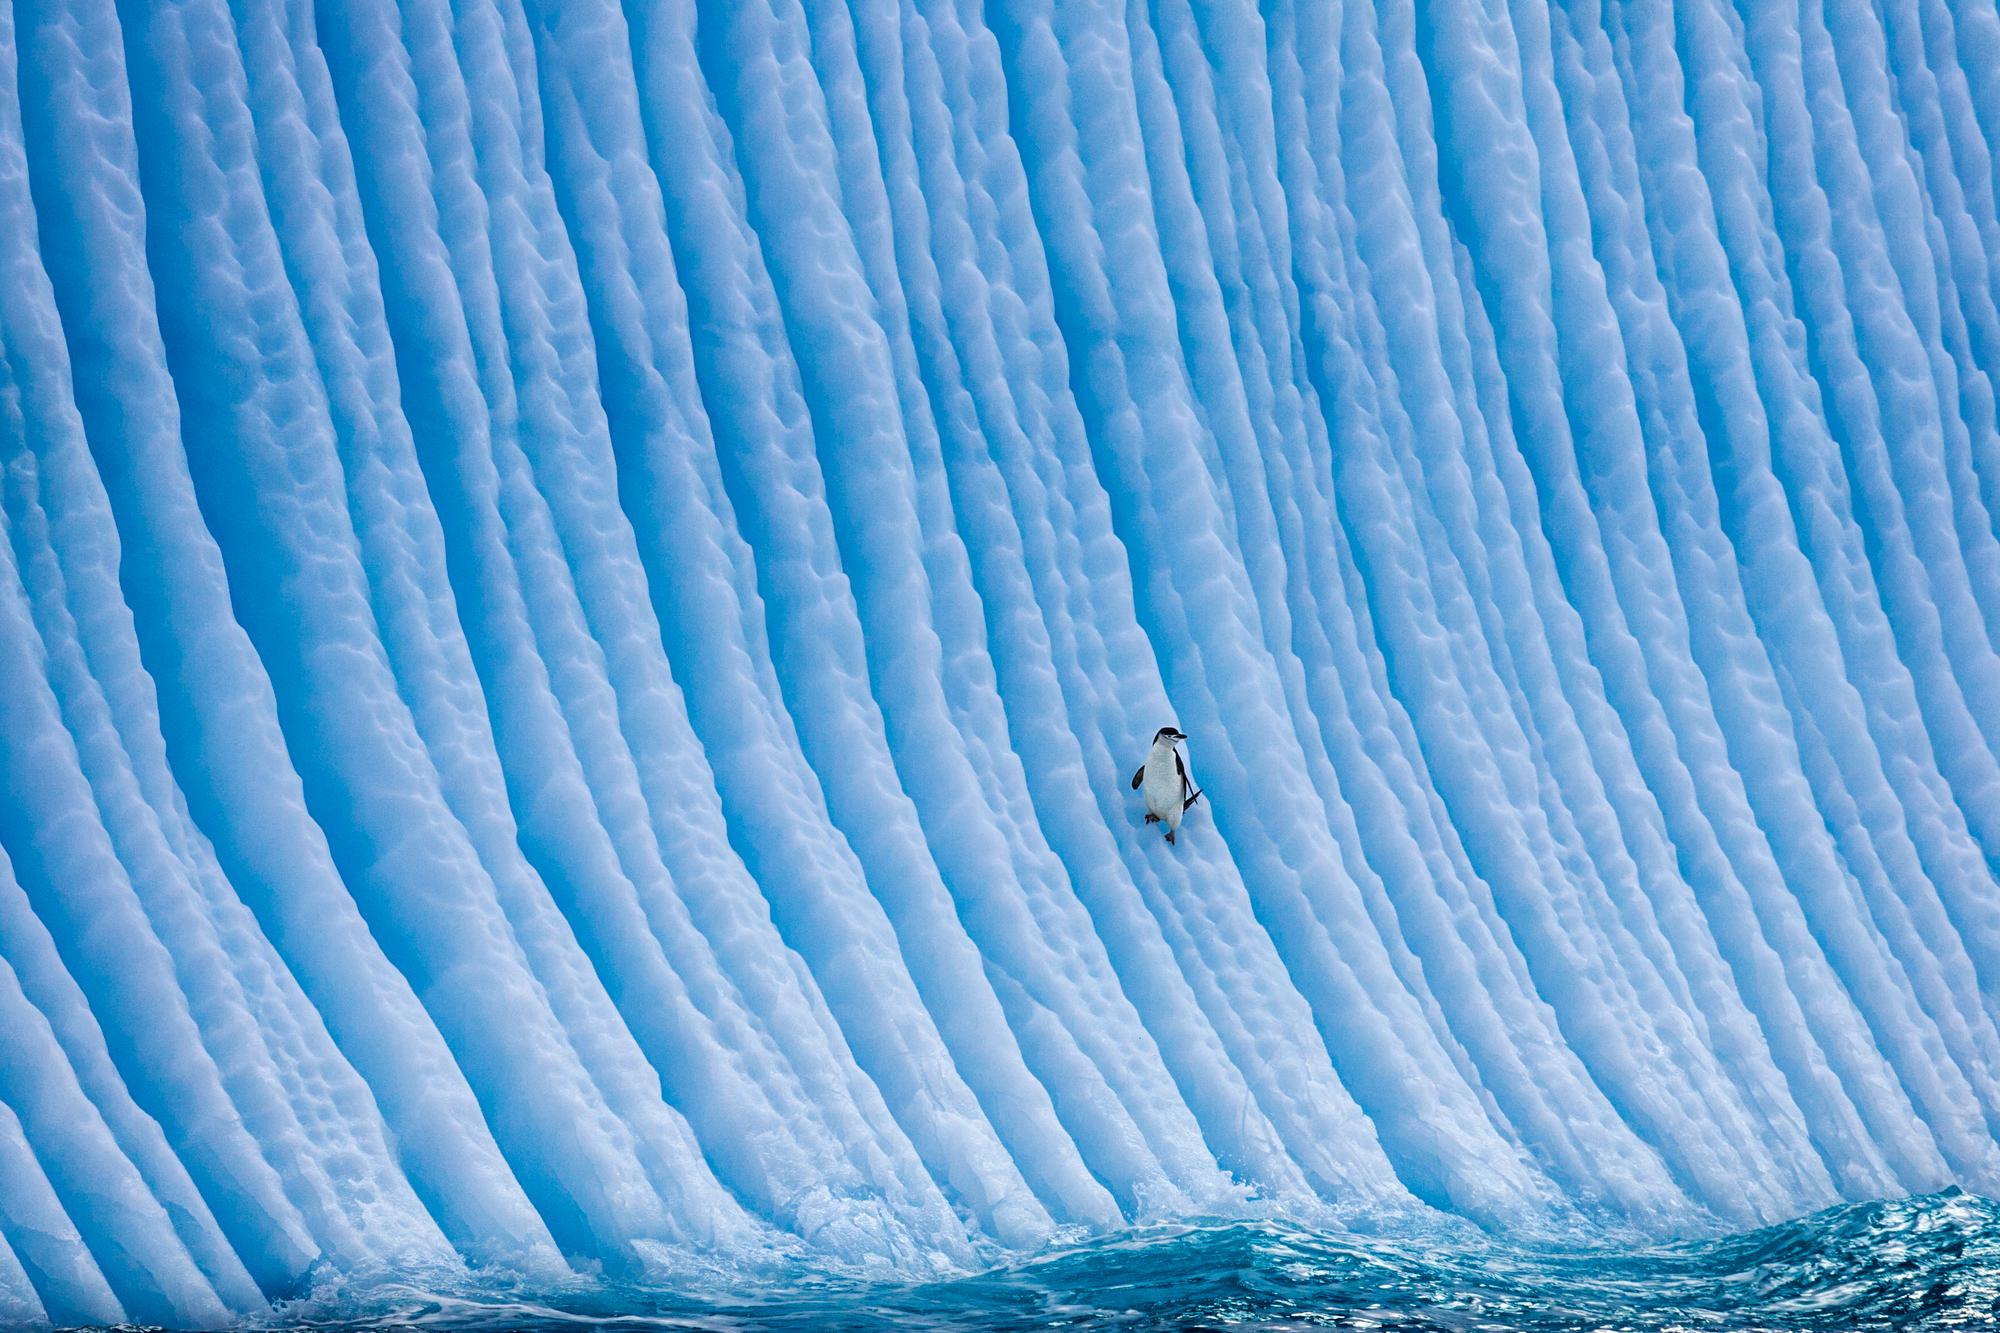 Paul Nicklen Color Photograph - Higher Ground